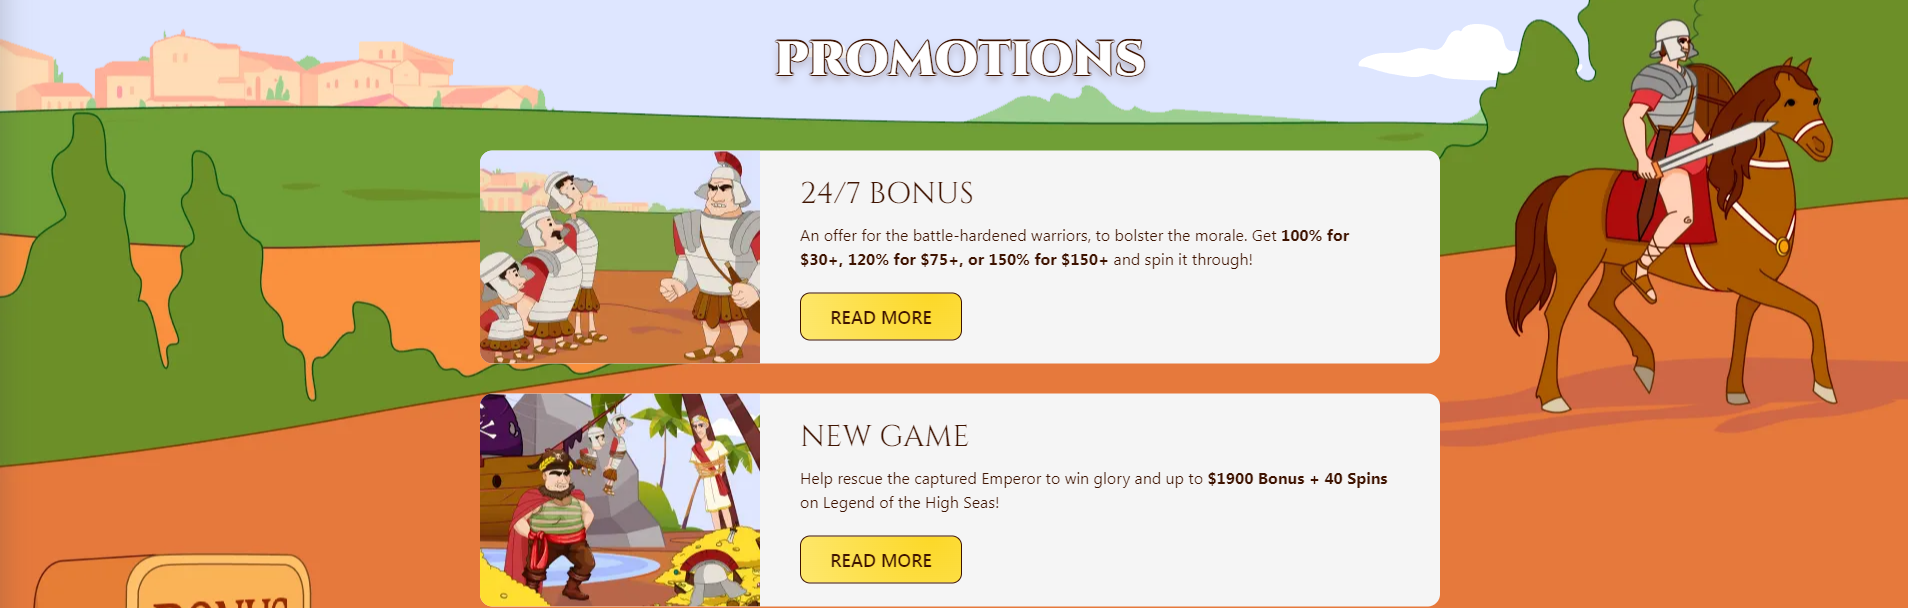 Play with Slots Empire Casino Promotions 2023 1